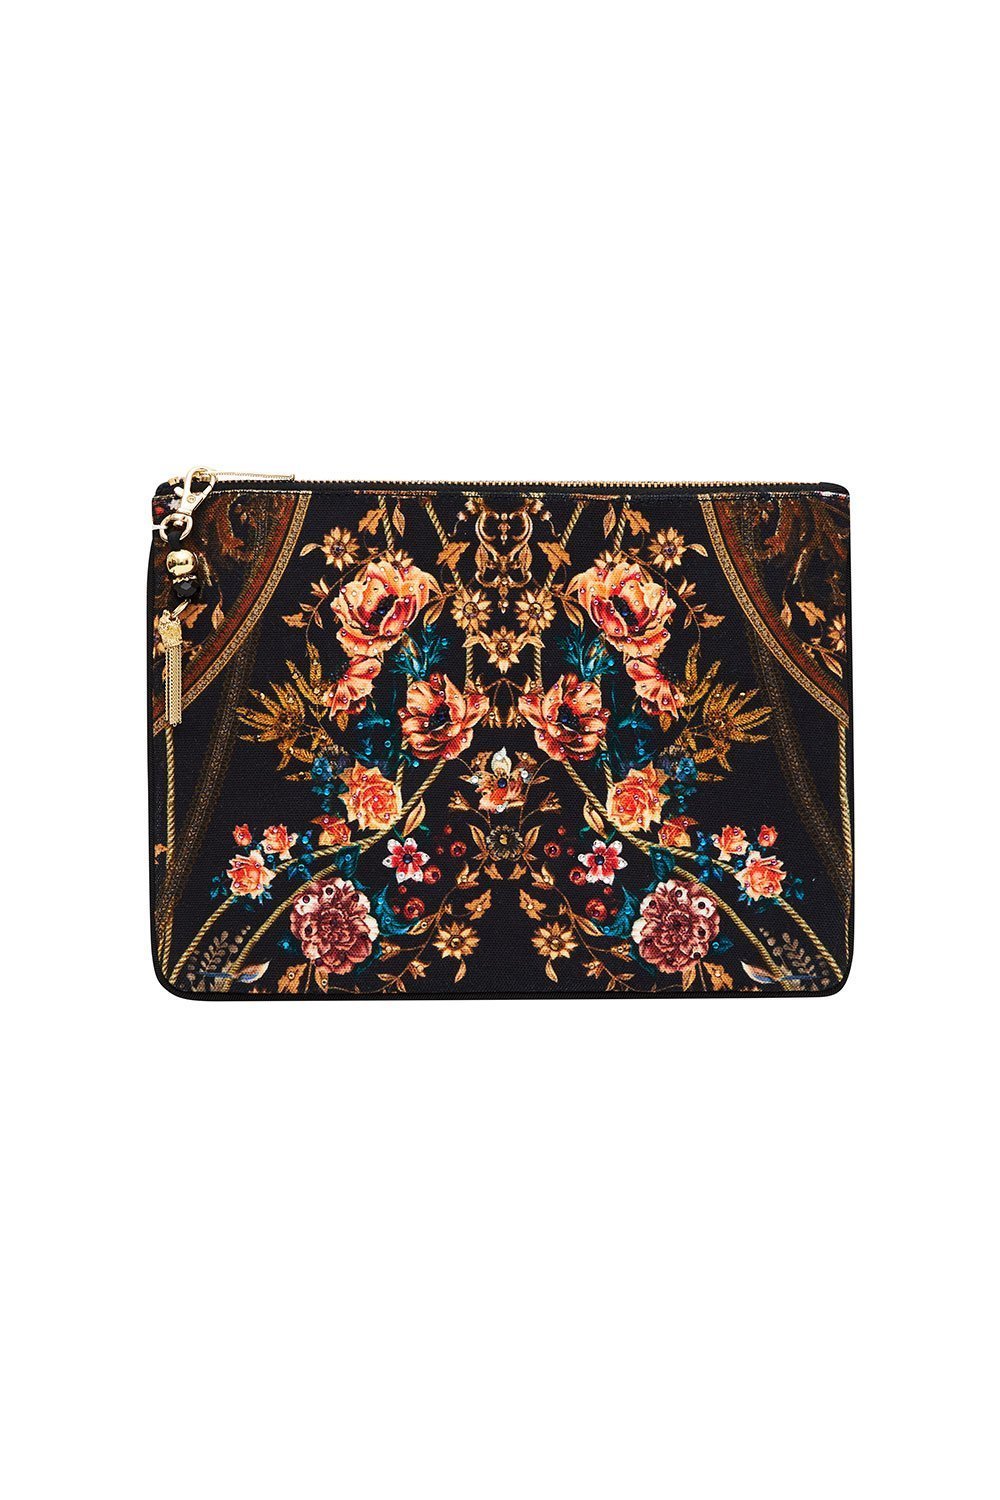 SMALL CANVAS CLUTCH BELLE OF THE BAROQUE